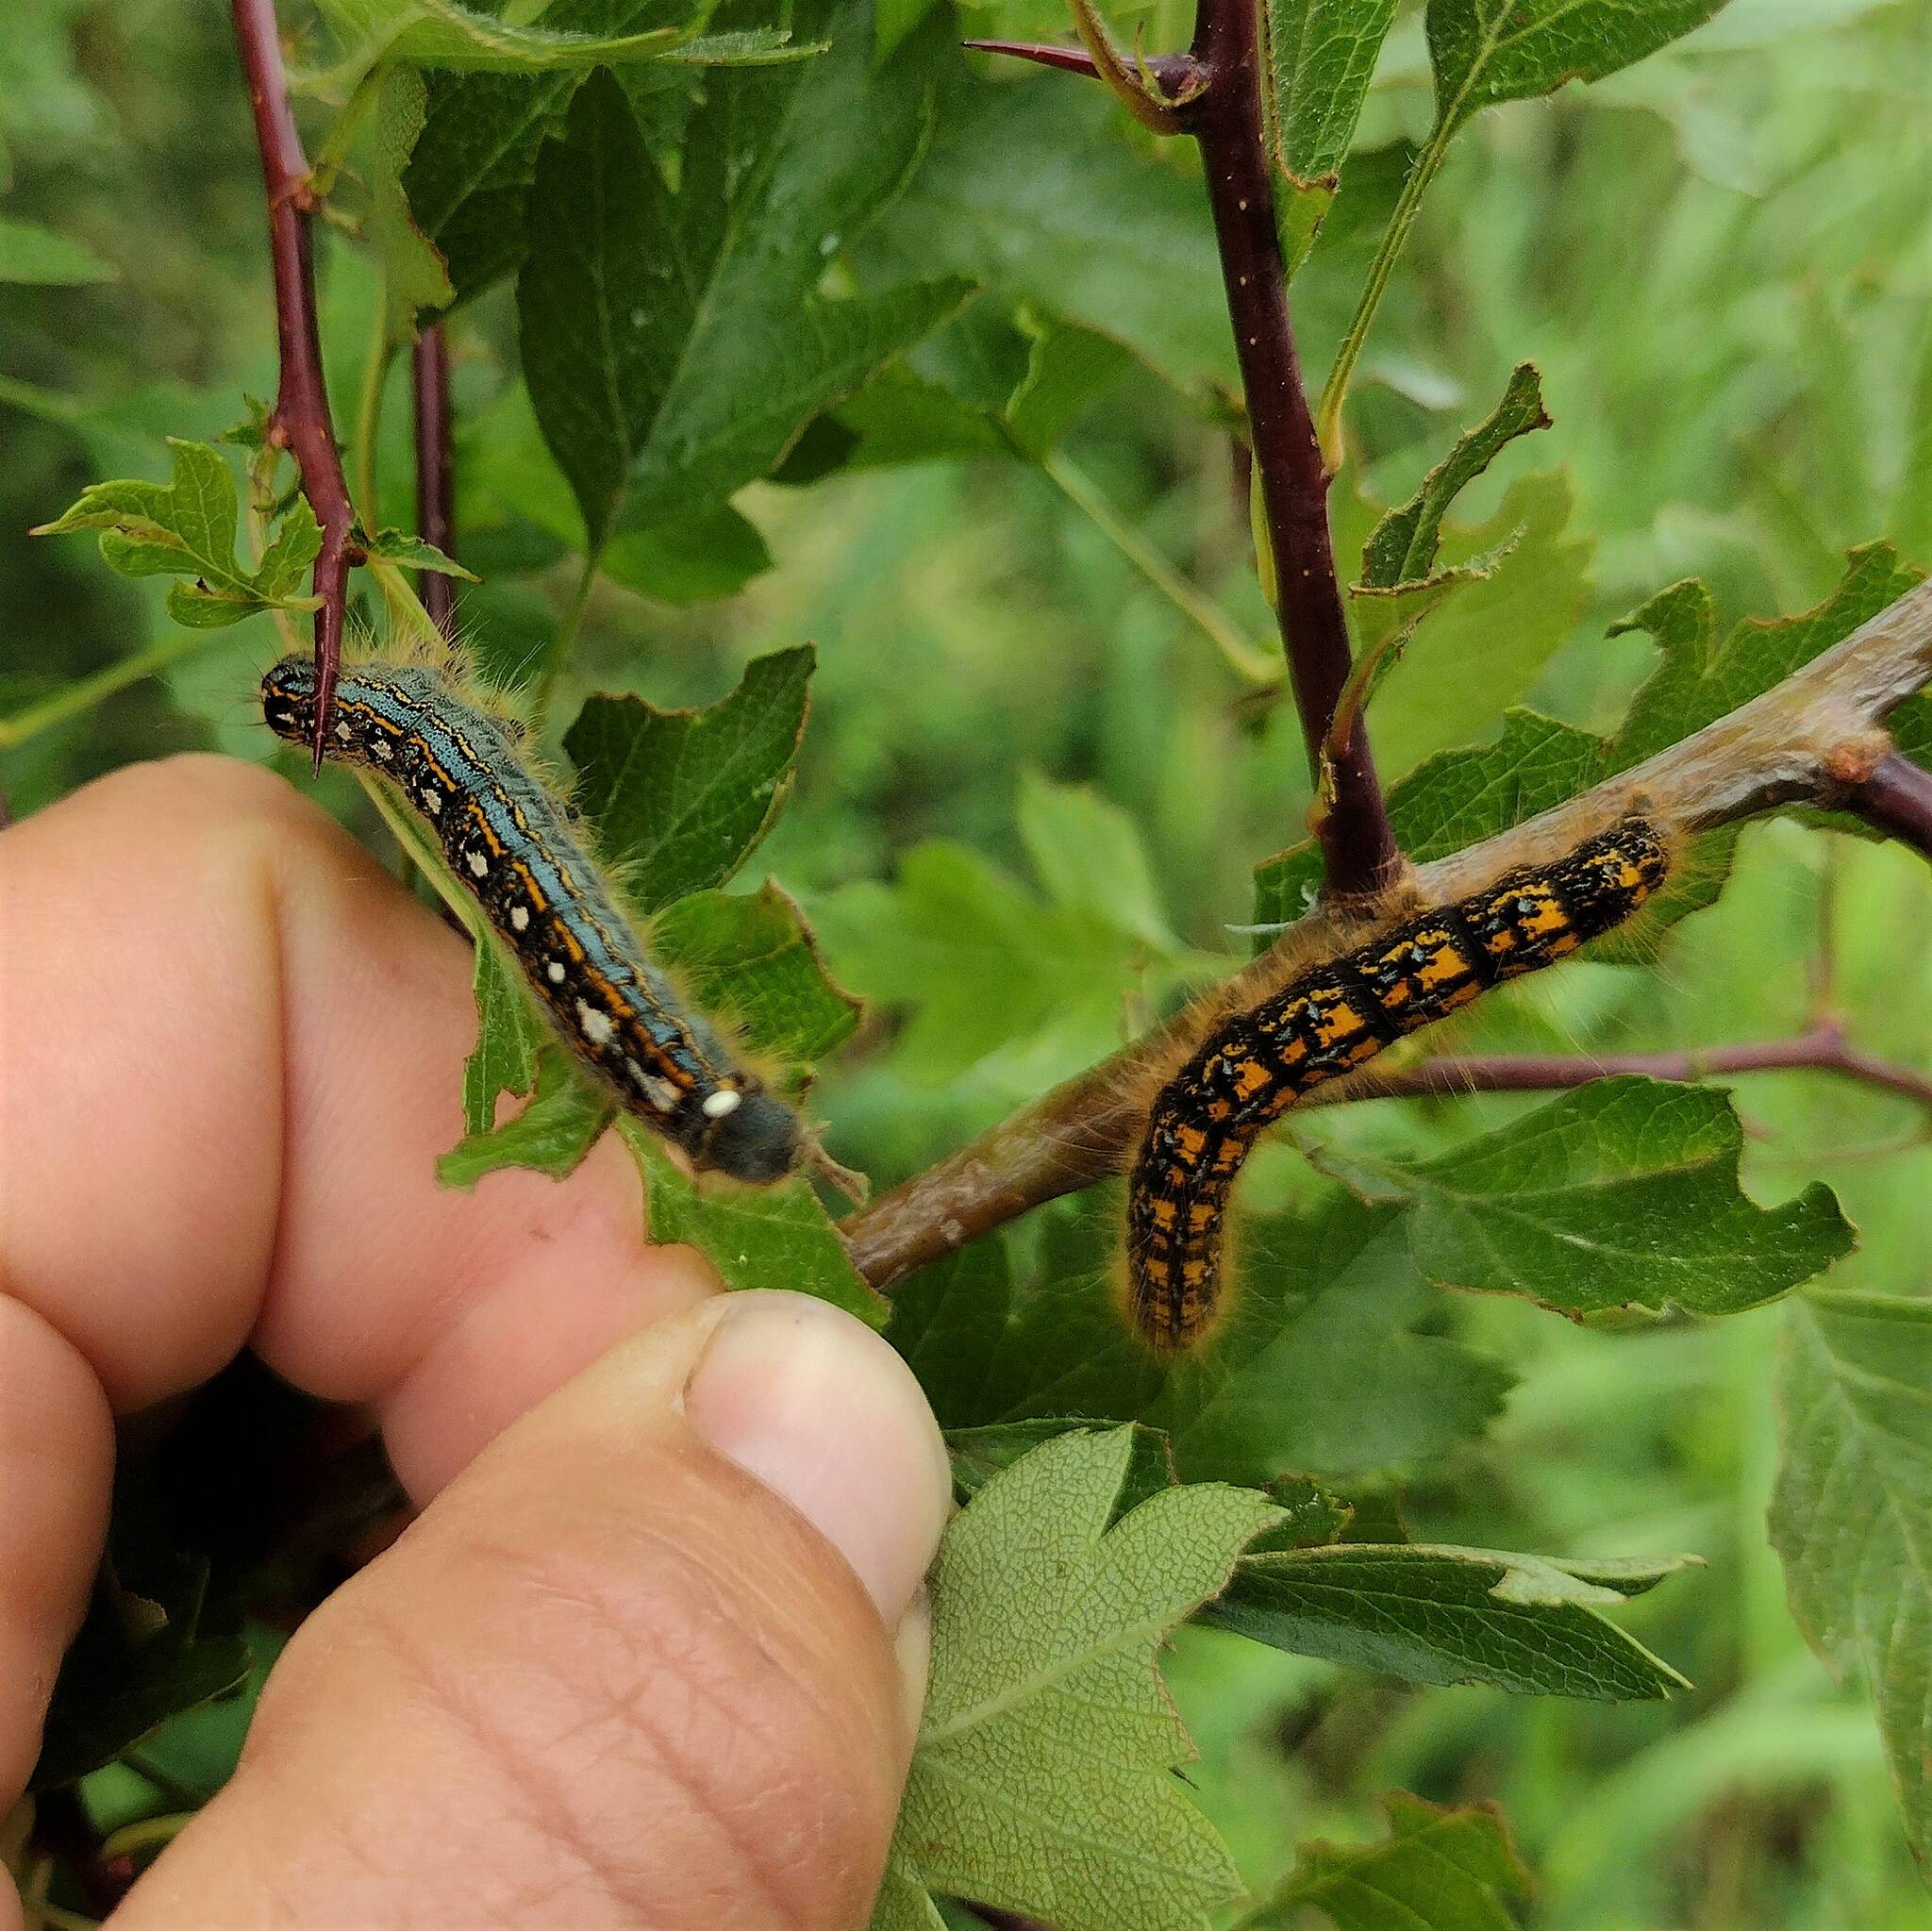 Contributed photo by Madrona Murphy
The Forest tent caterpillar is on the left, and the Western tent caterpillar is on the right.